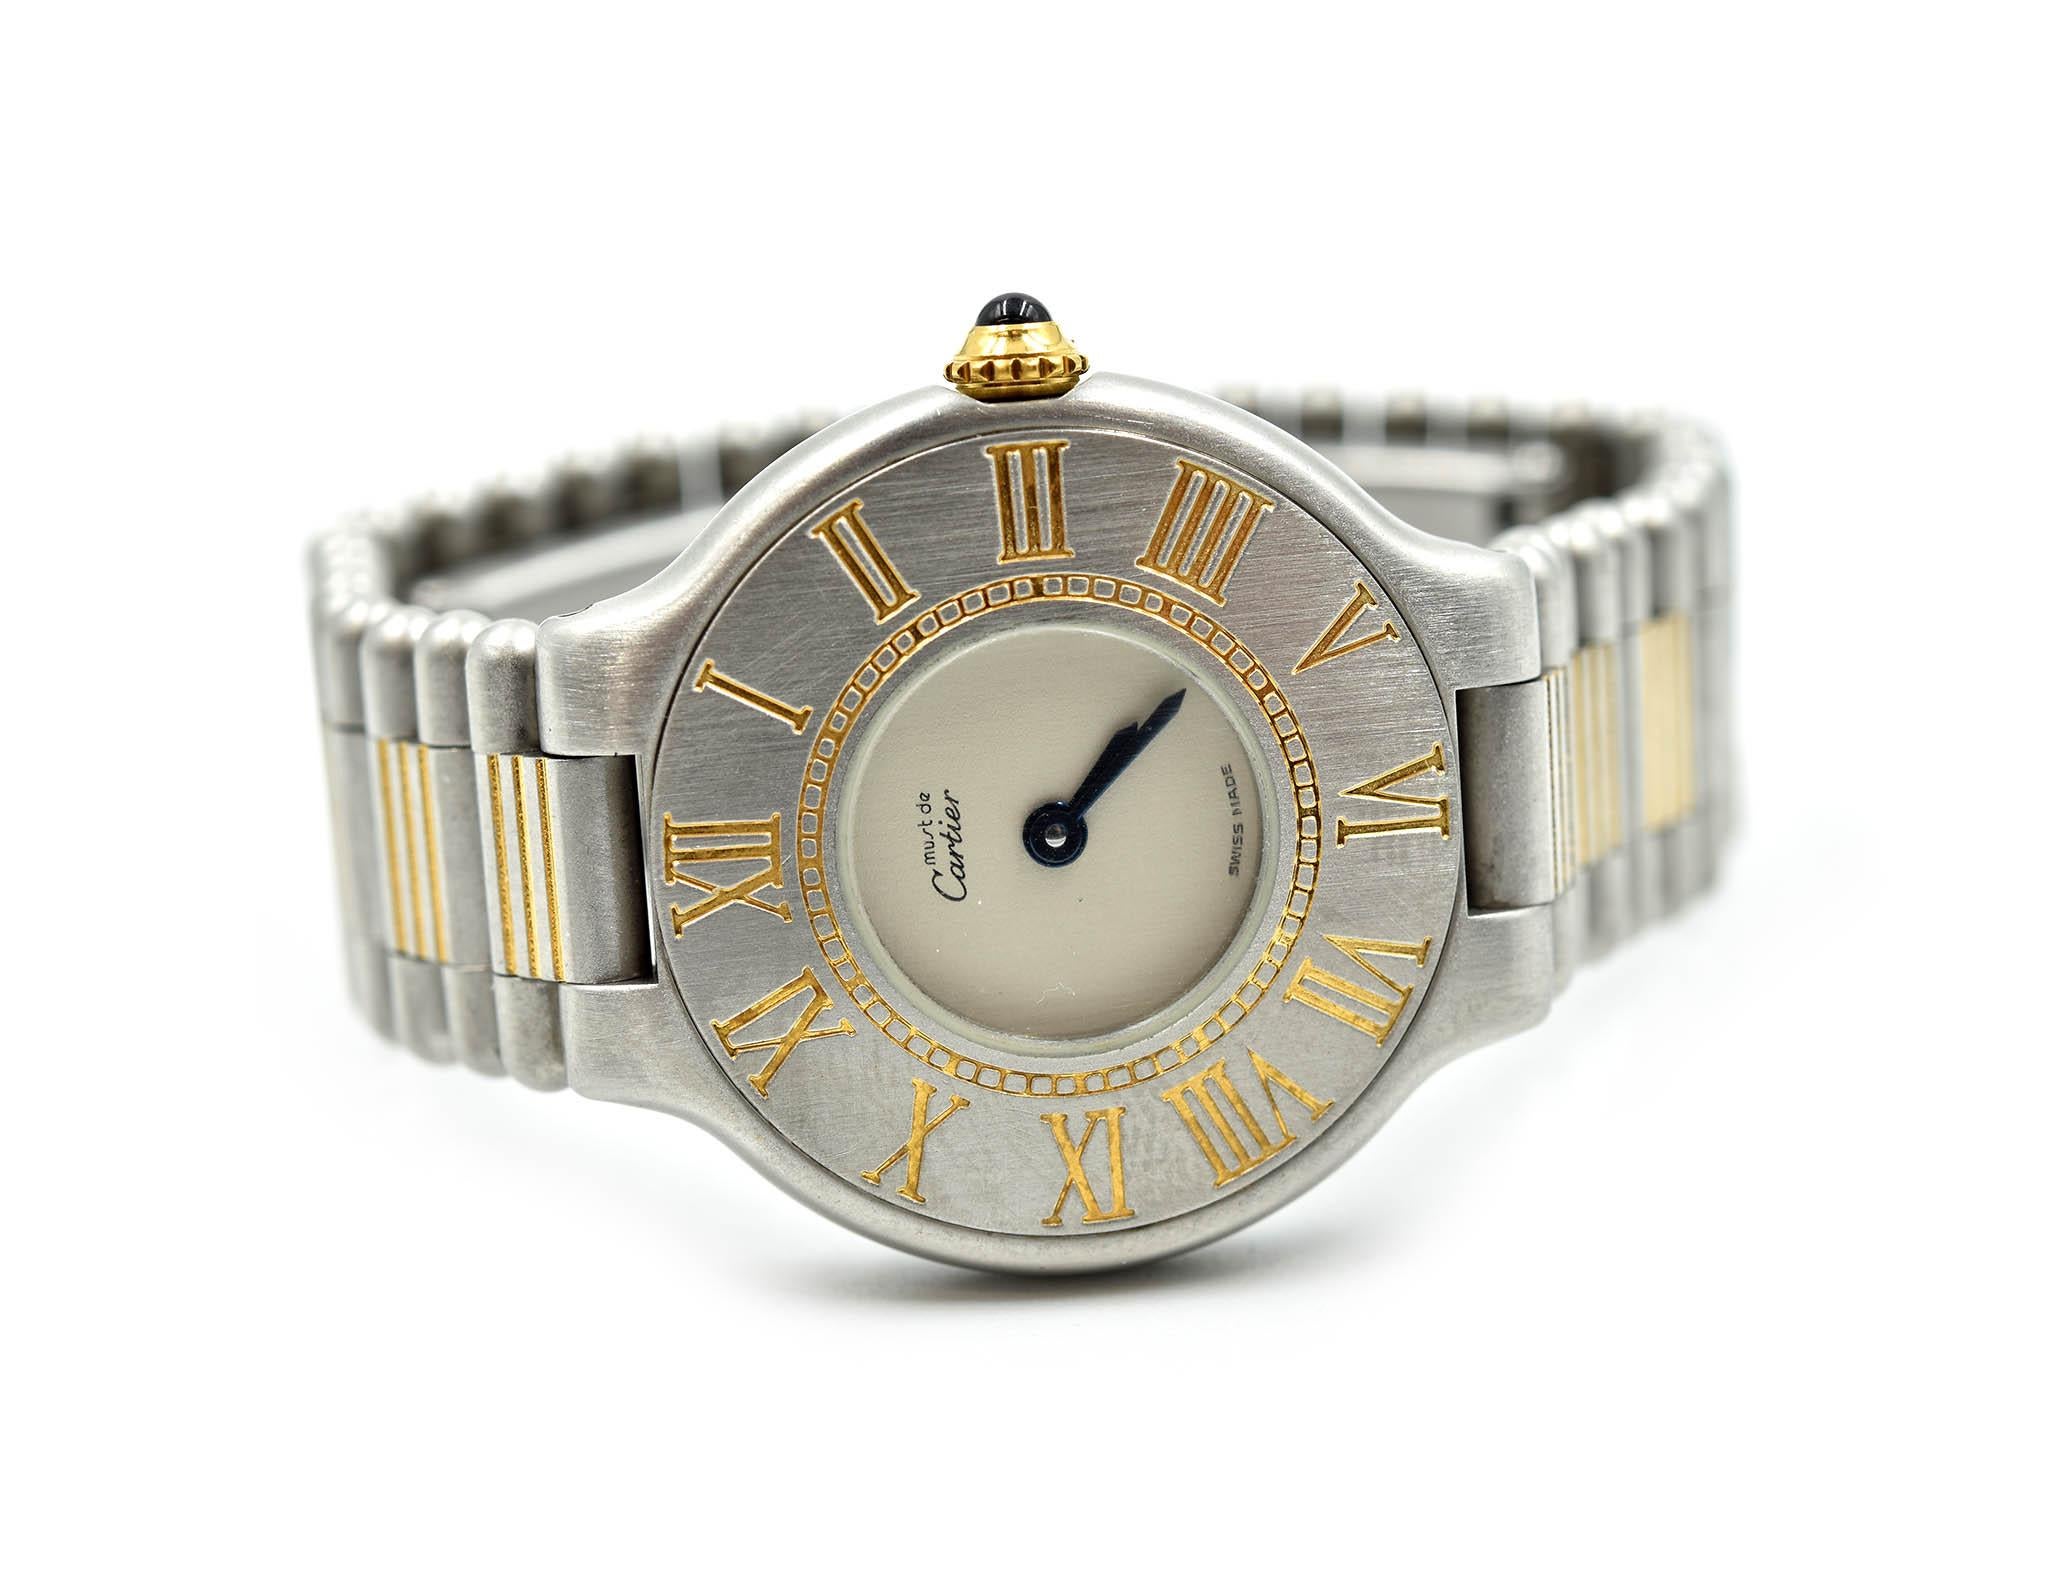 Movement: quartz
Function: hours, minutes
Case: round 28mm stainless steel case with gold tone accent case with blue sapphire cabochon crown
Band: Cartier stainless steel and gold tone bullet bracelet, fit for 5 ½ inch wrist  
Dial: Cartier satin